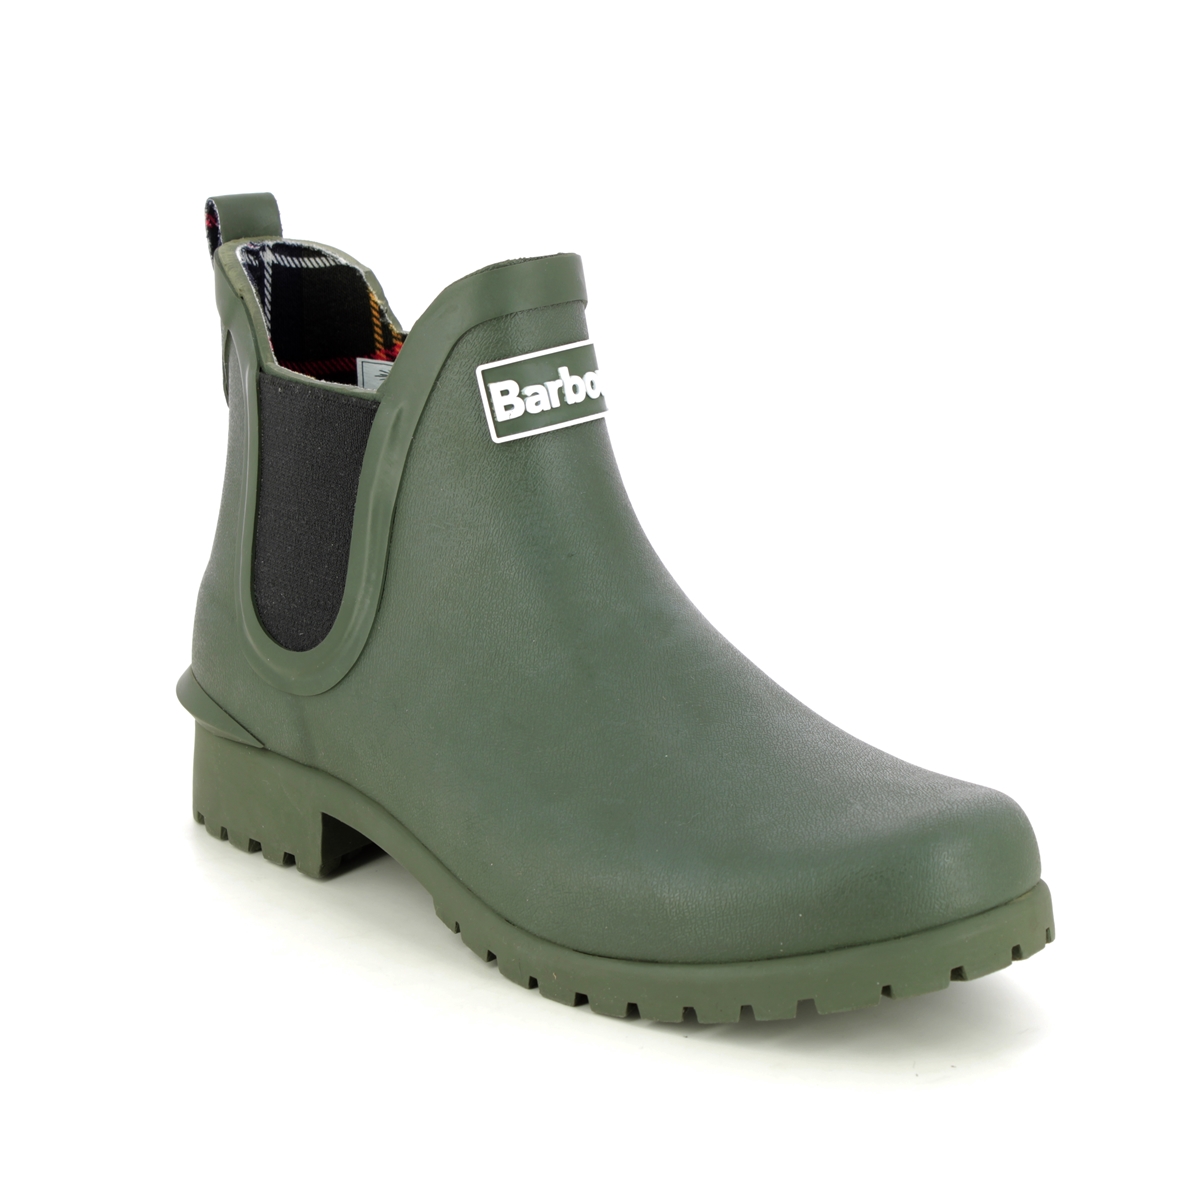 Barbour Wilton Wellie Olive Green Boots Lrf0066-Ol11 In Size 5 In Plain Olive Green